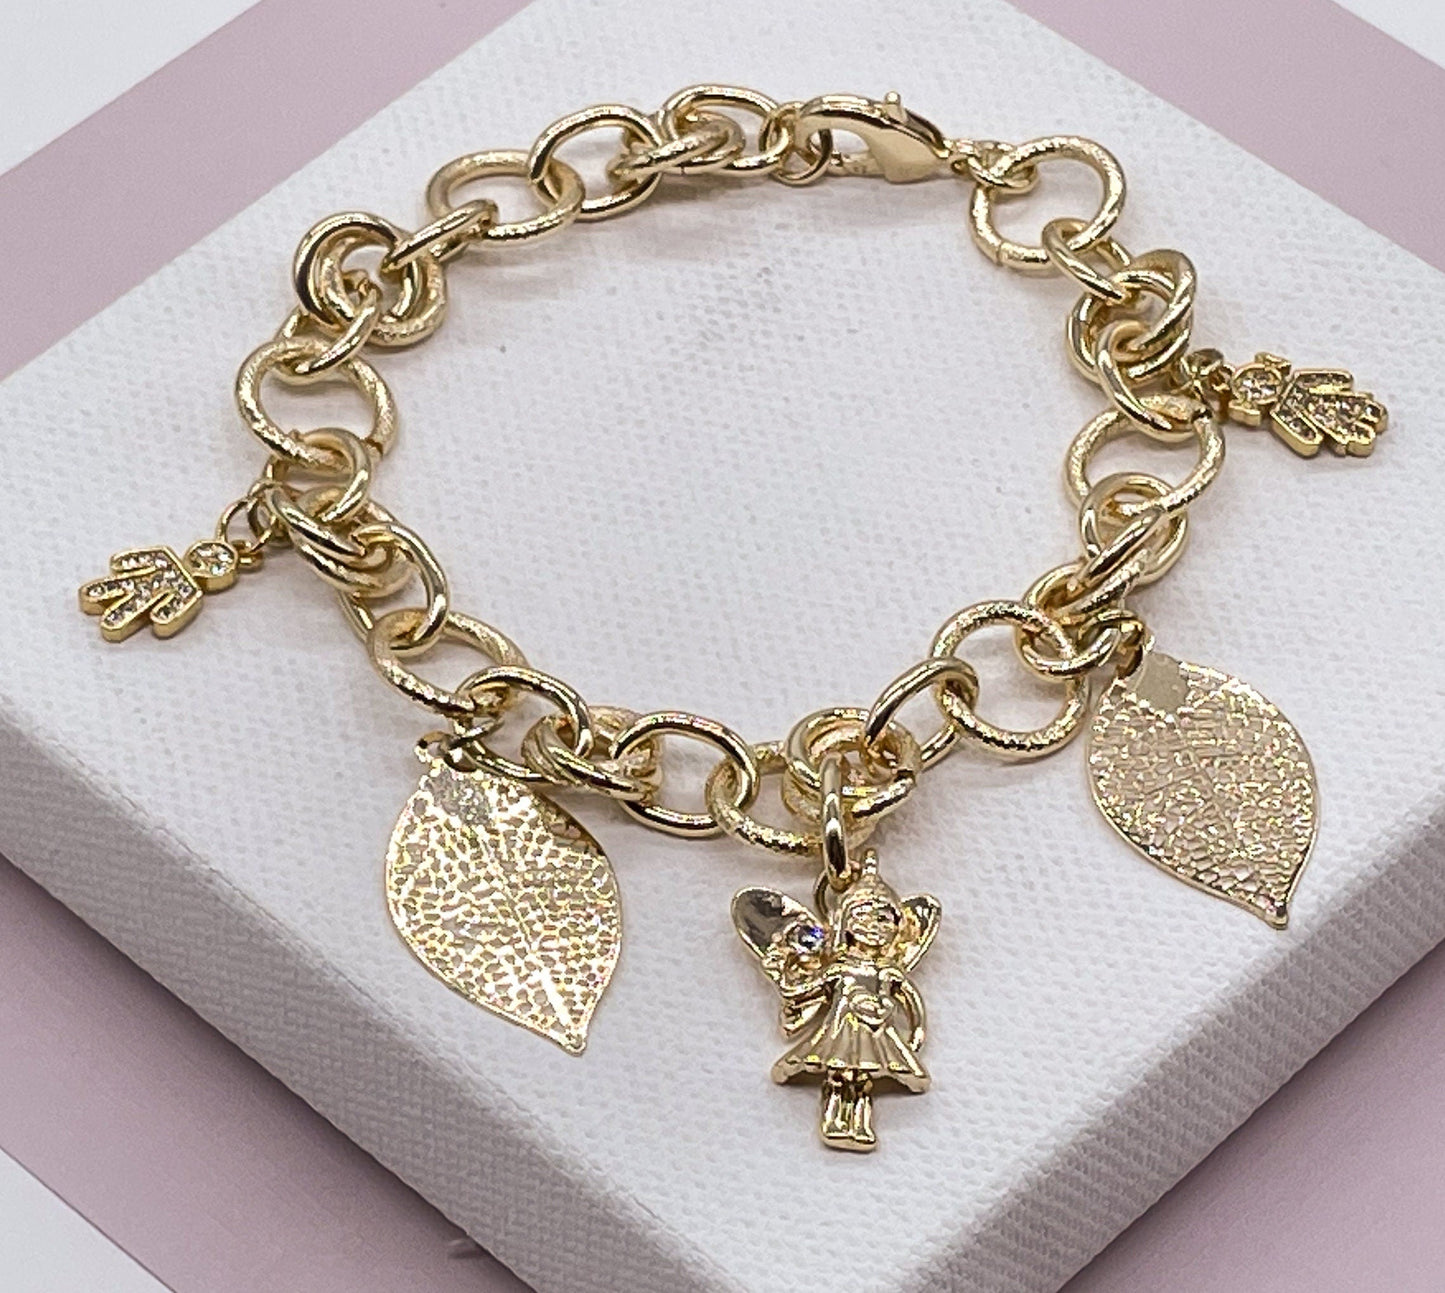 18k Gold Layered Large Link Bracelet Featuring Hanging Boy and Girl In Zirconia